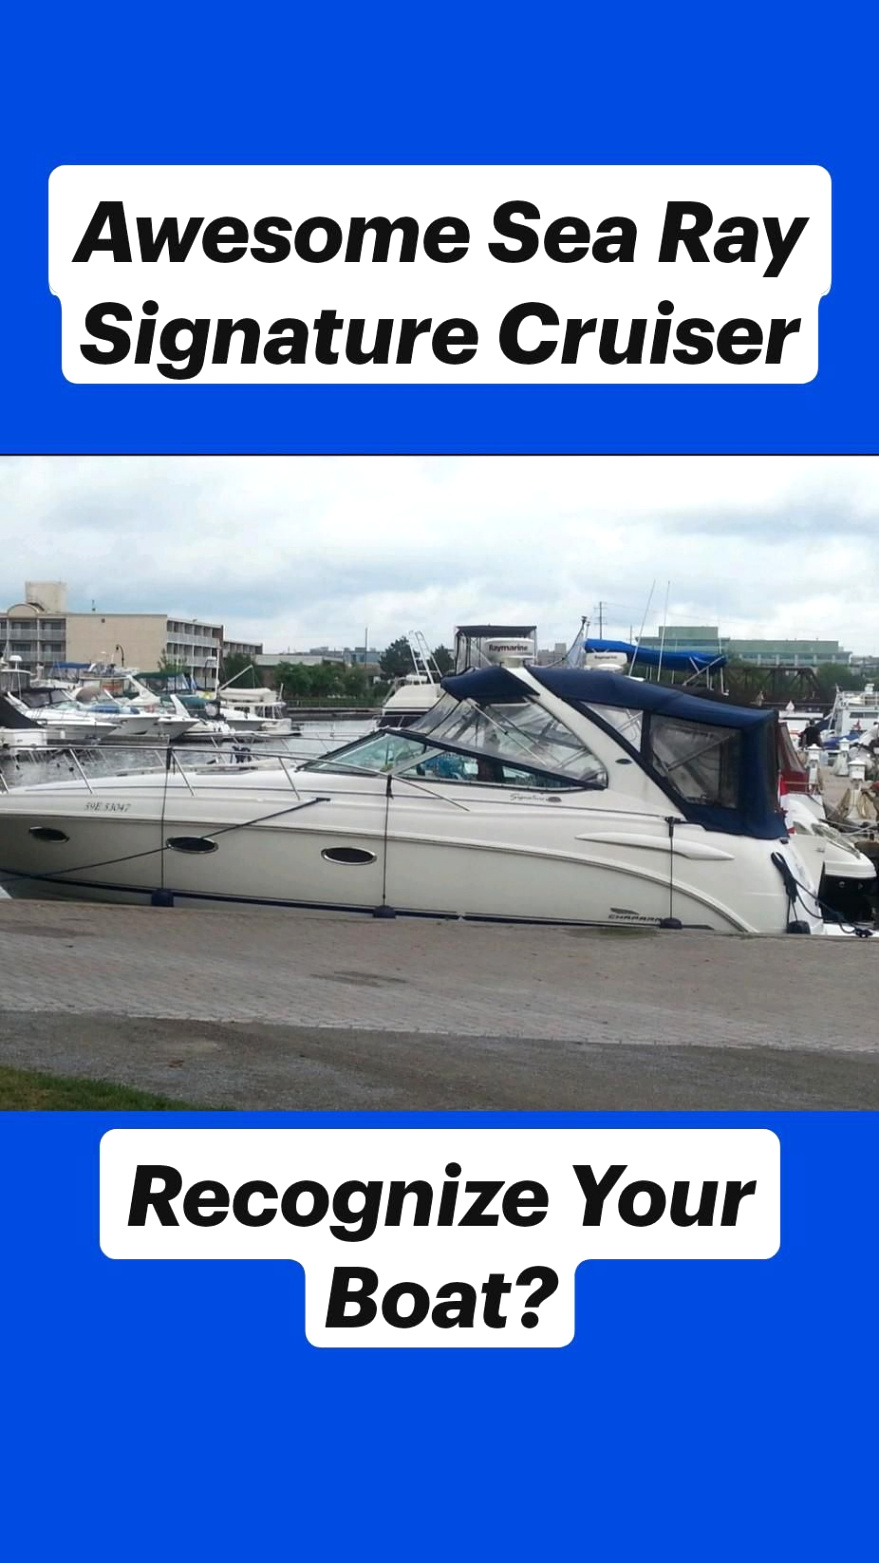 Automobile Insurance Provider In Dover Beaches north, Ocean County Dans Awesome Sea Ray Signature Cruiser Recognize Your Boat Ad Searay Cruiser Boating Boatlife